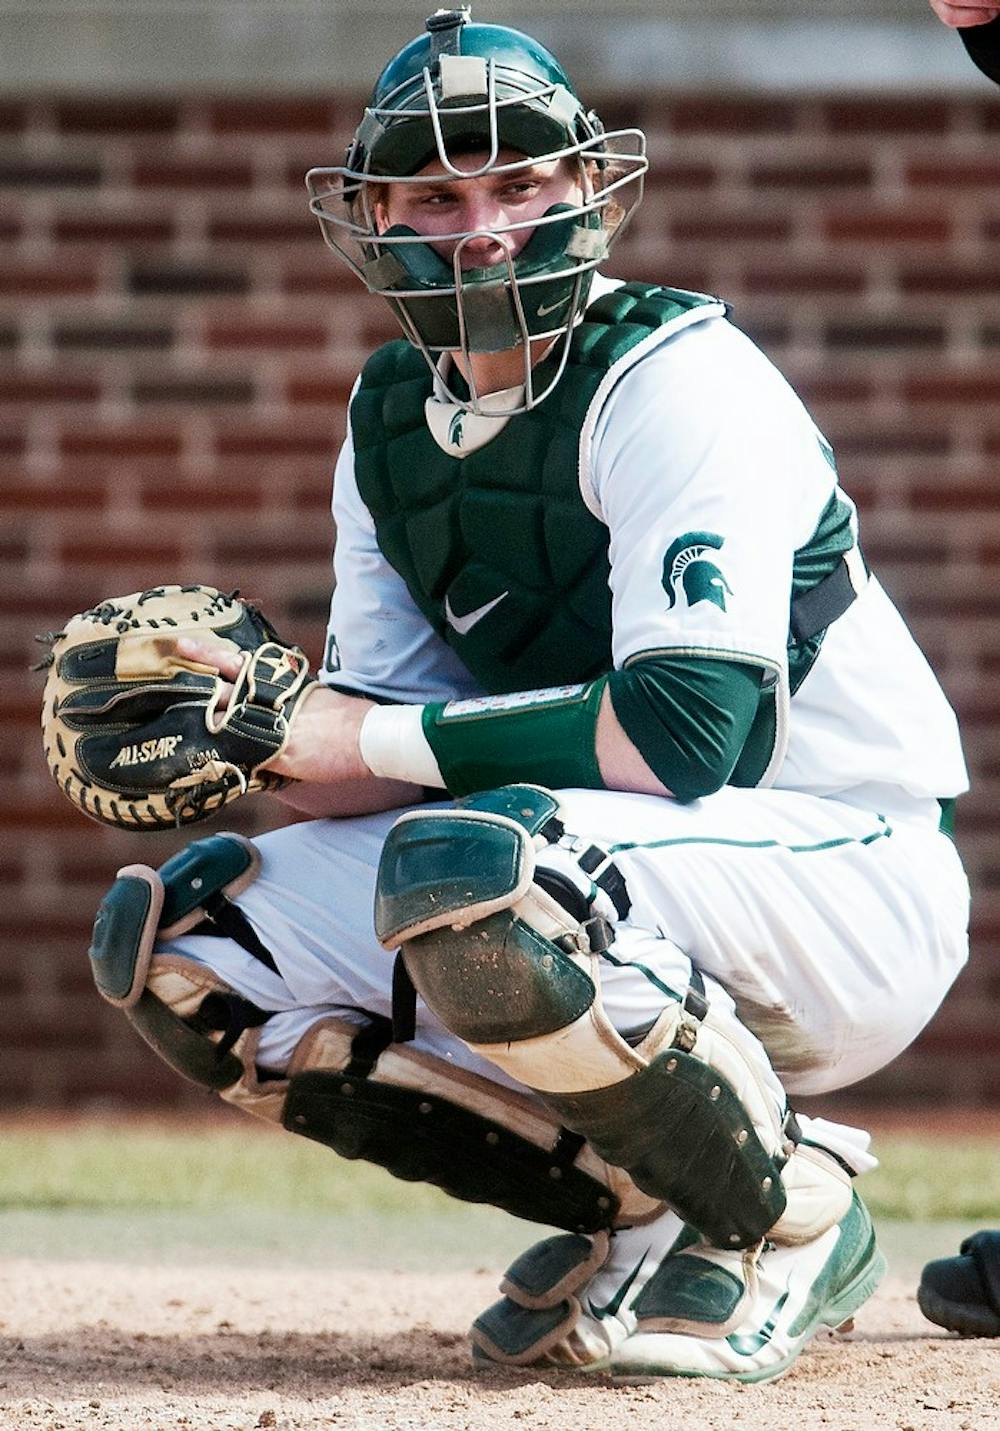 <p>Senior catcher Joel Fisher looks to the dugout during the game against Central Michigan on April 8, 2014, at McLane Baseball Stadium at Old College Field. The Spartans lost to the Chippewas, 10-1, ending MSU's 7-game winning streak. Danyelle Morrow/The State News</p>